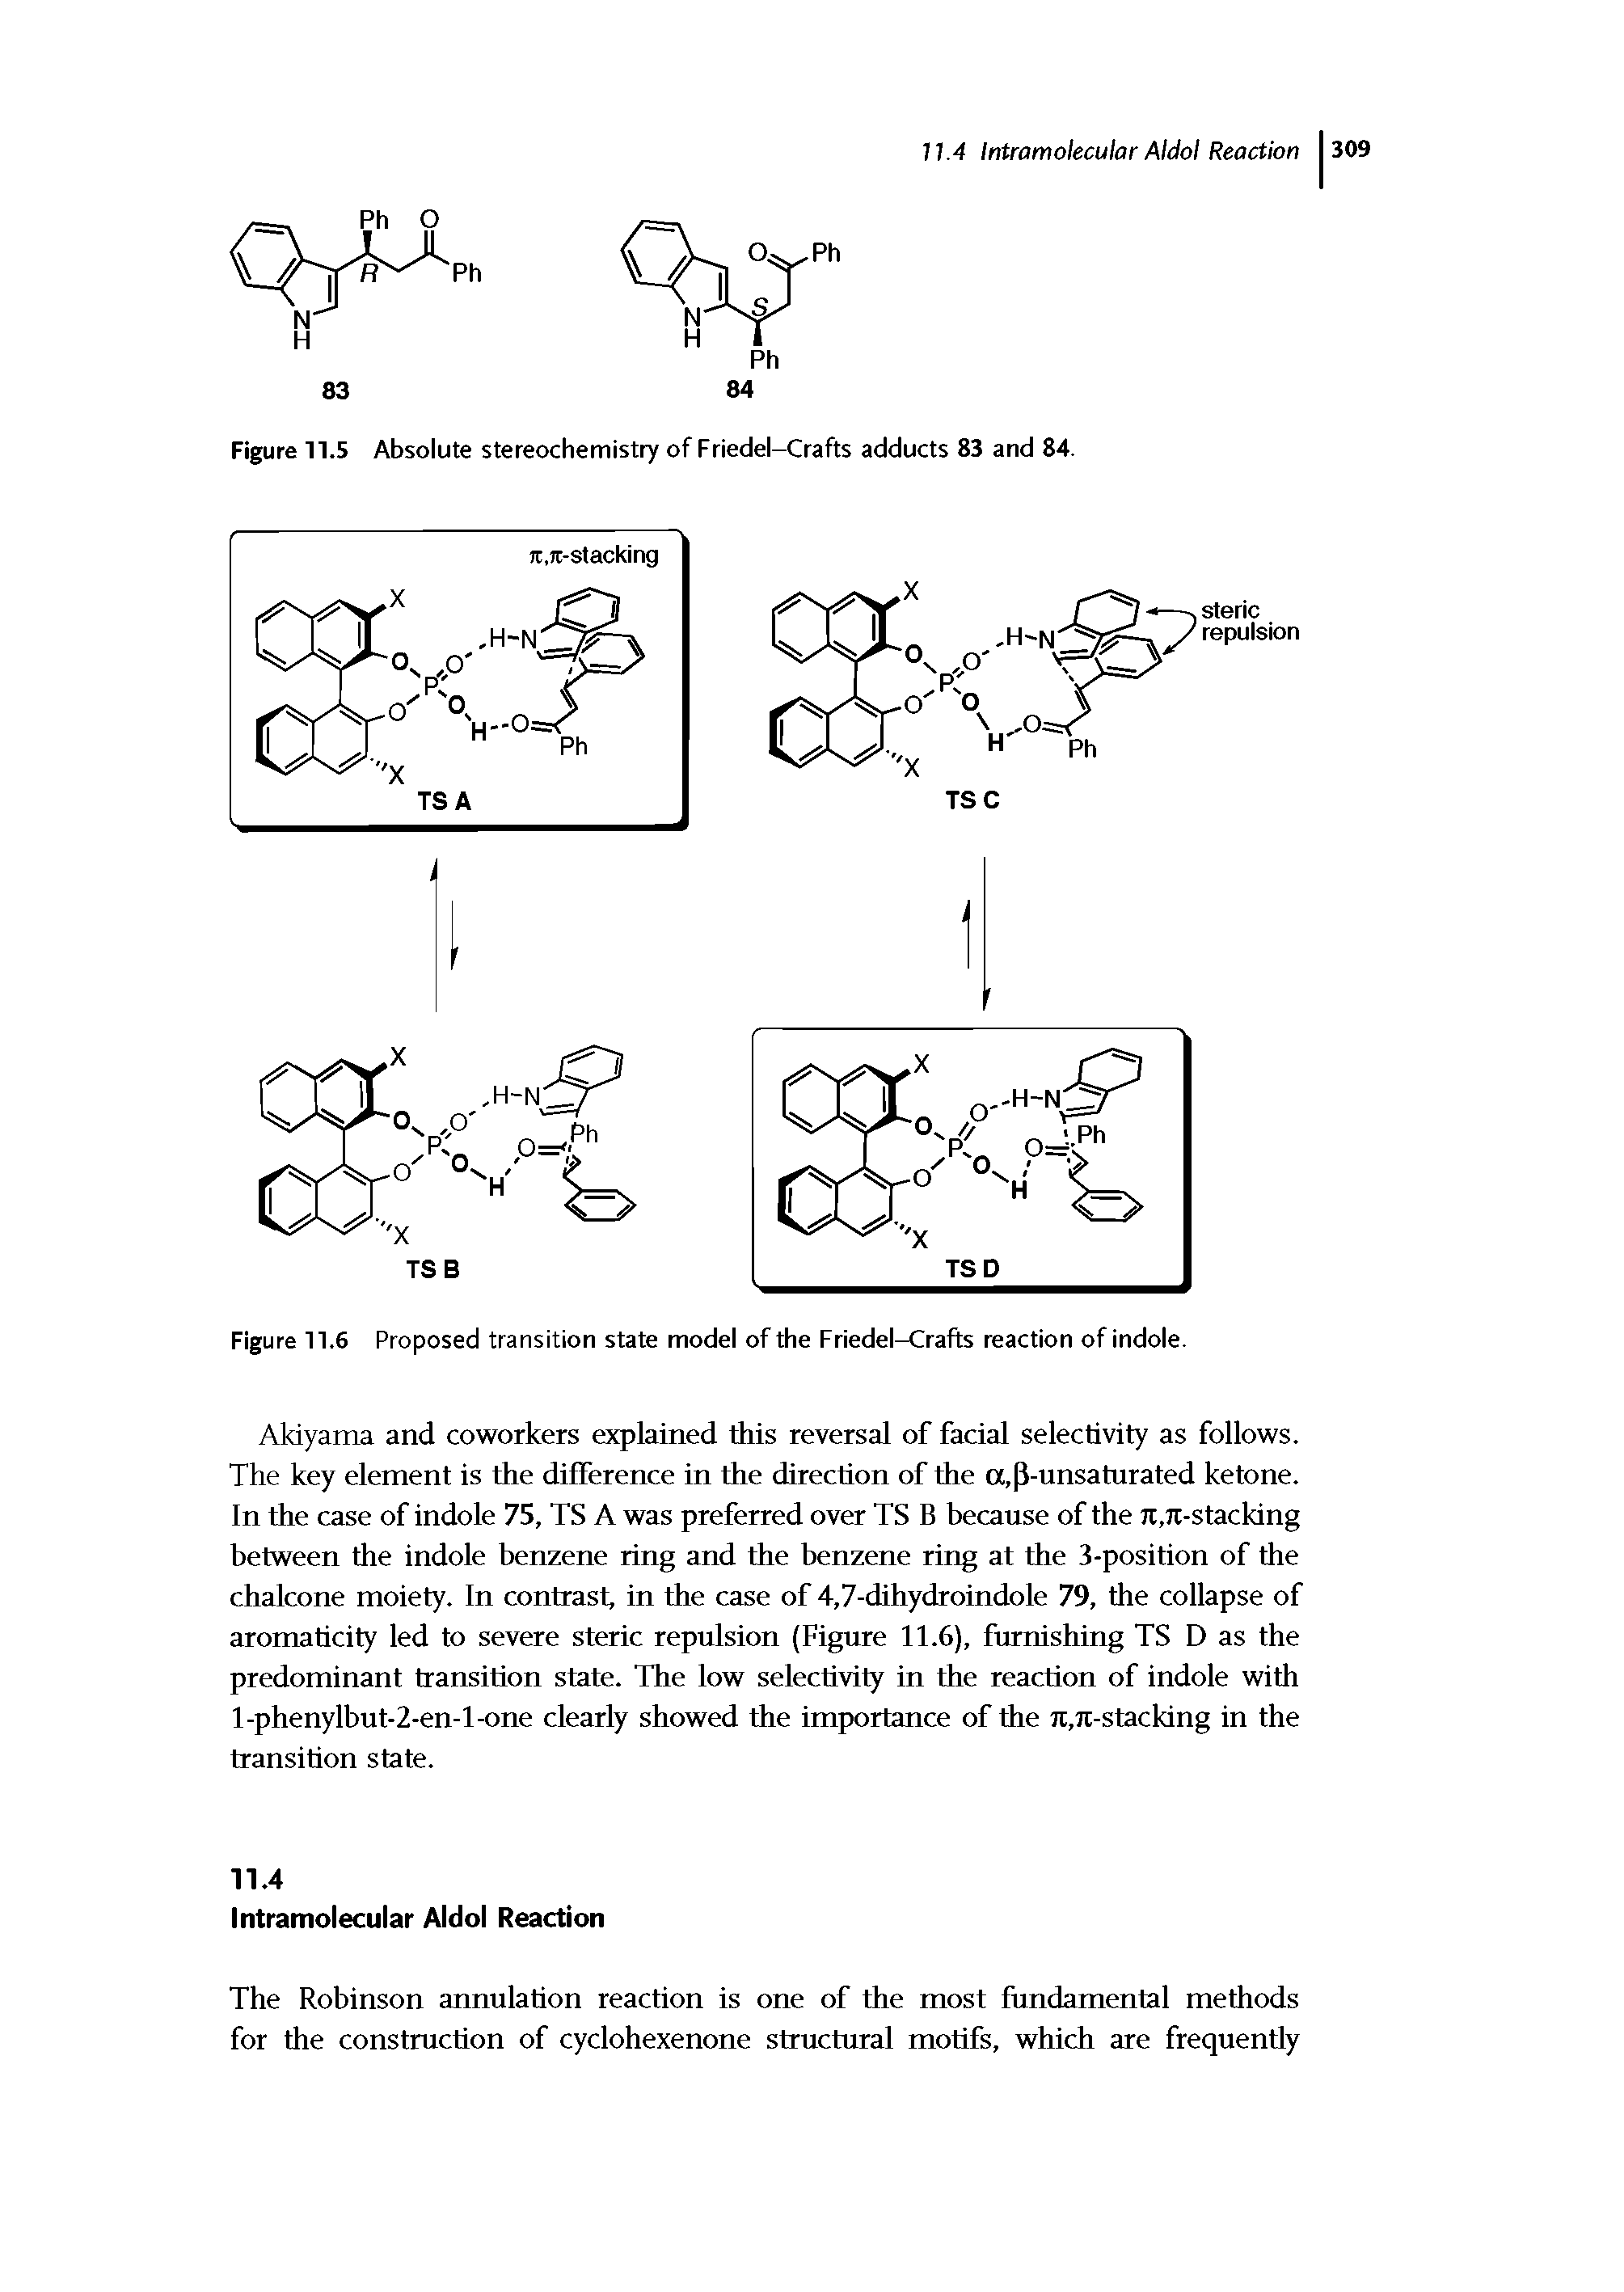 Figure 11.6 Proposed transition state model of the Friedel-Crafts reaction of indole.